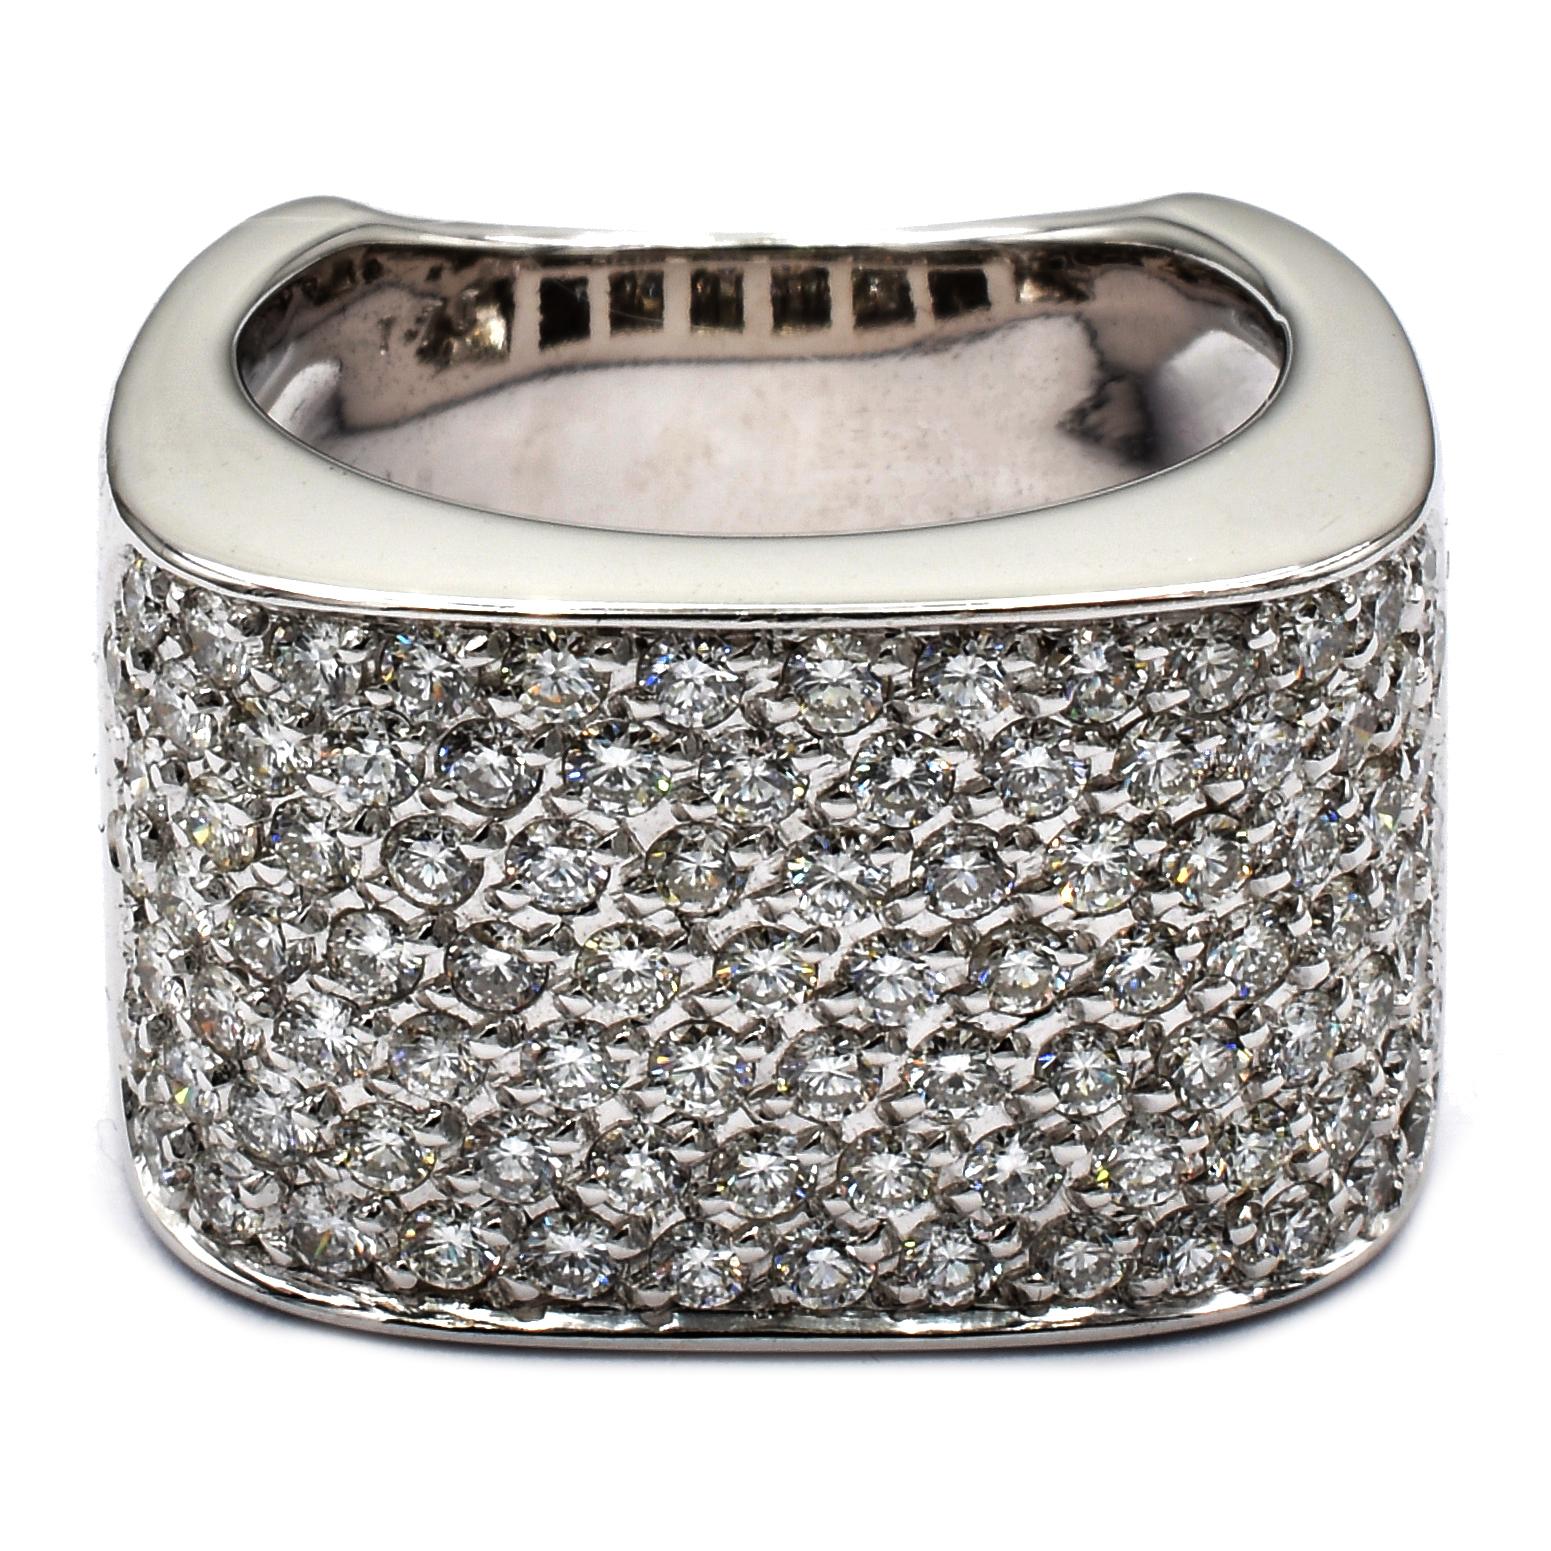 Gilberto Cassola 18Kt White Gold Band Ring with a Paveé Set of White Diamonds.
Handmade in Italy in Our Atelier in Valenza (AL)
18Kt Gold g 18.50
G Color Vs Clarity Diamonds ct 1.70
This Ring is sized E 54 (US 6 3/4) and can be shipped in any size